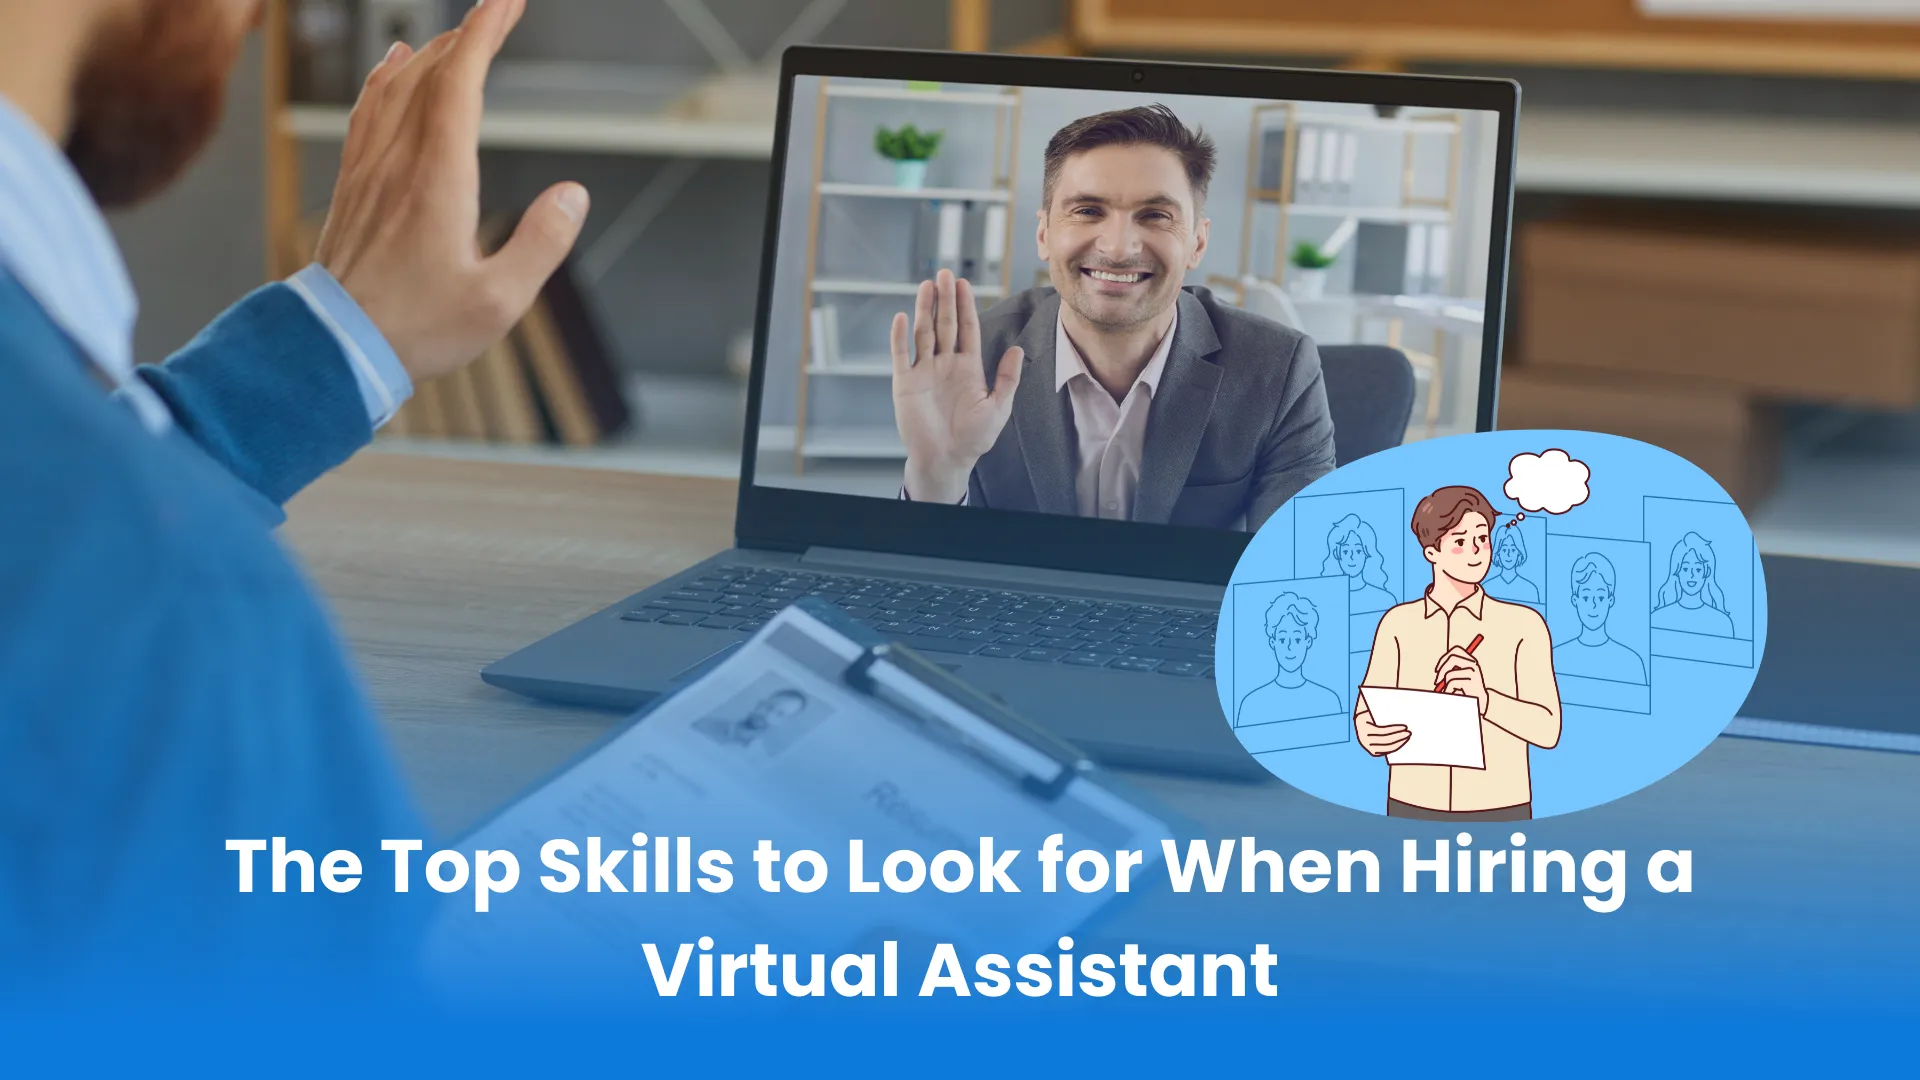 The essential skills to seek when hiring a virtual assistant.